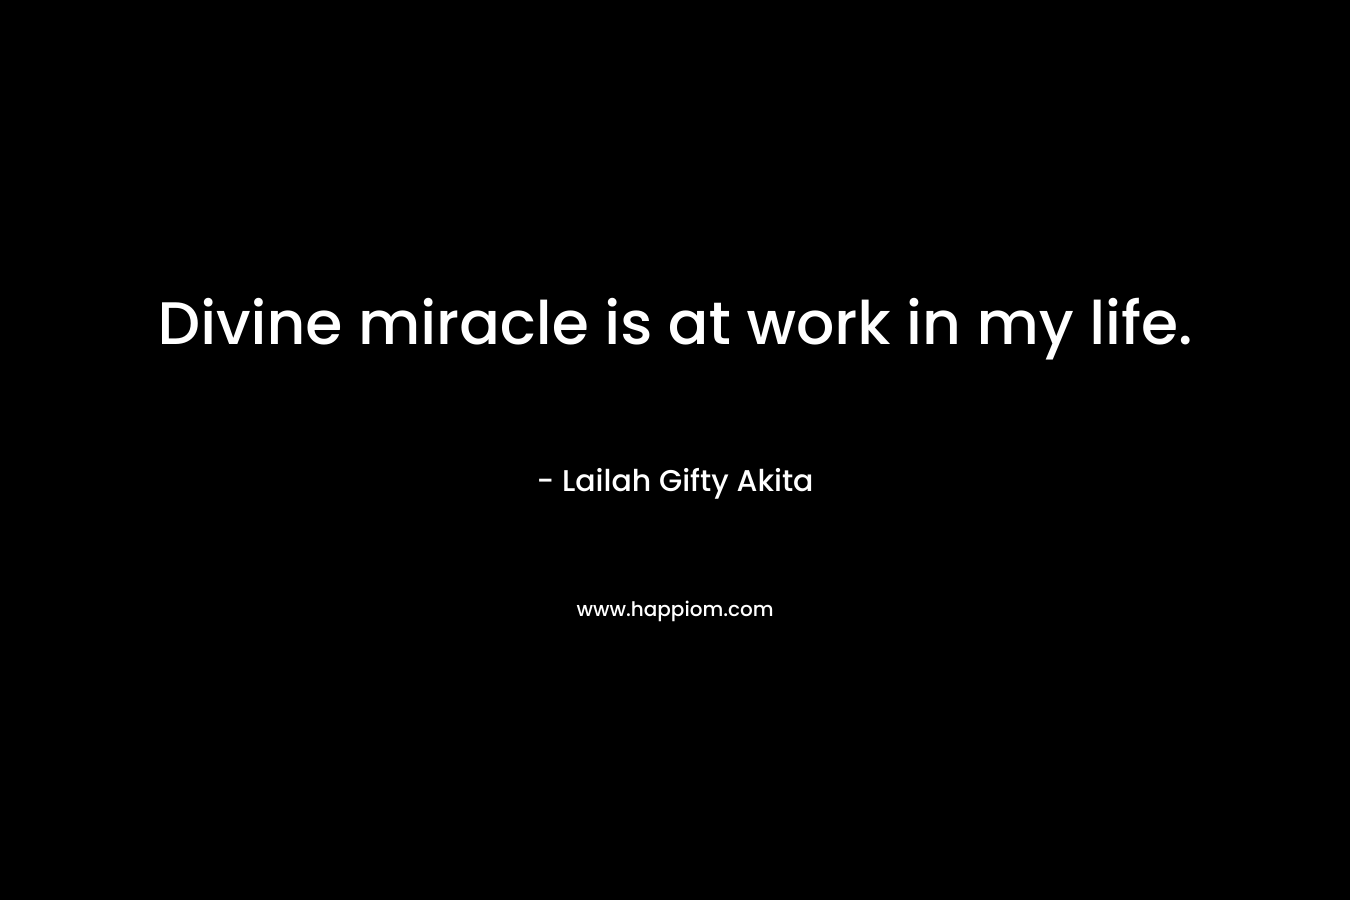 Divine miracle is at work in my life.